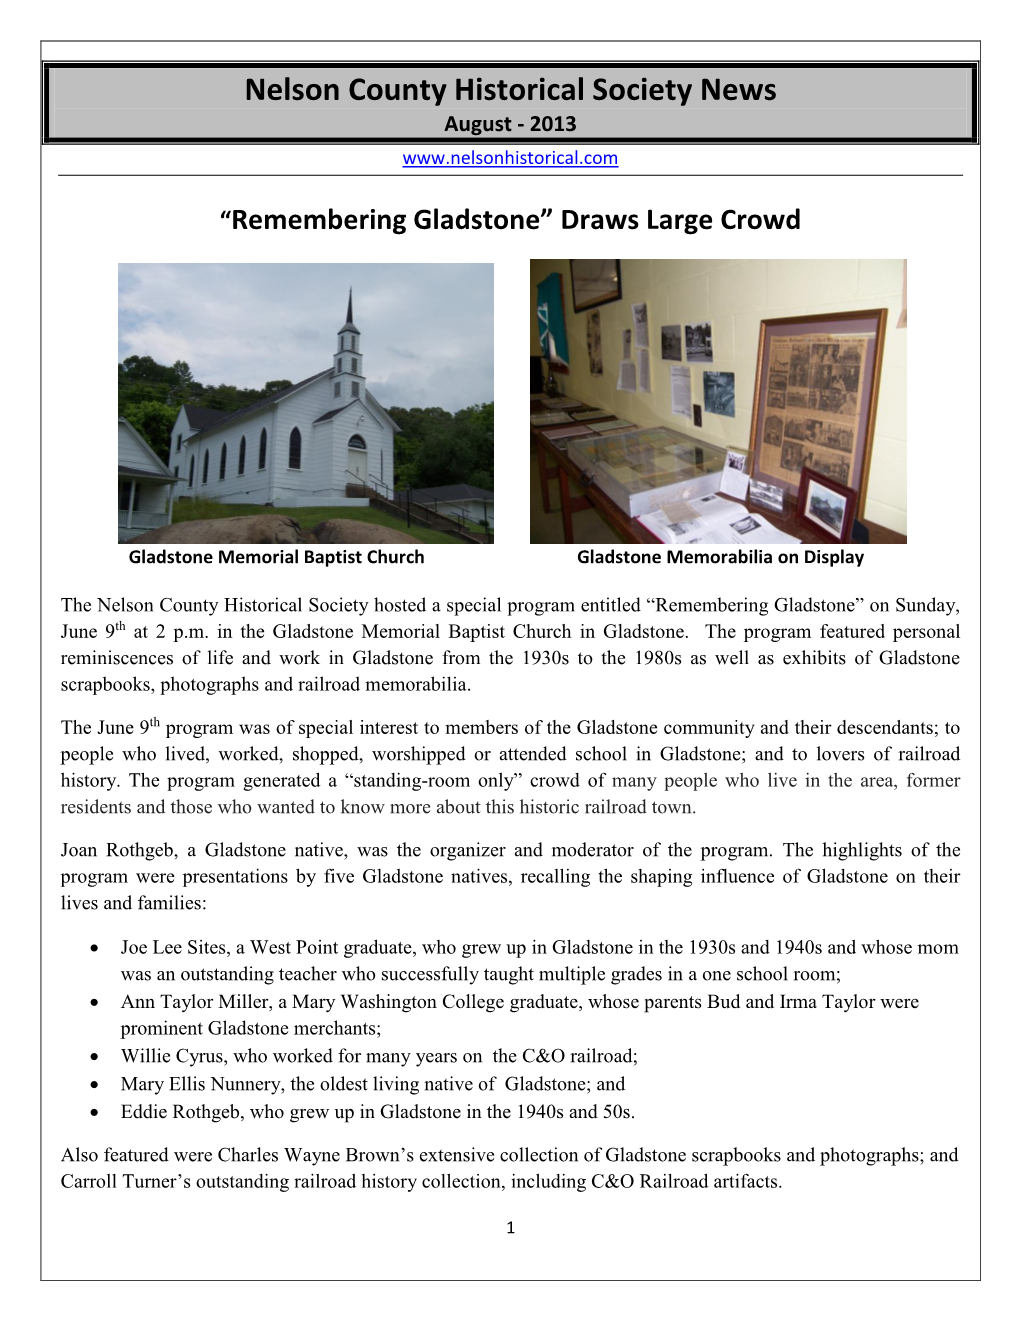 Nelson County Historical Society News August - 2013